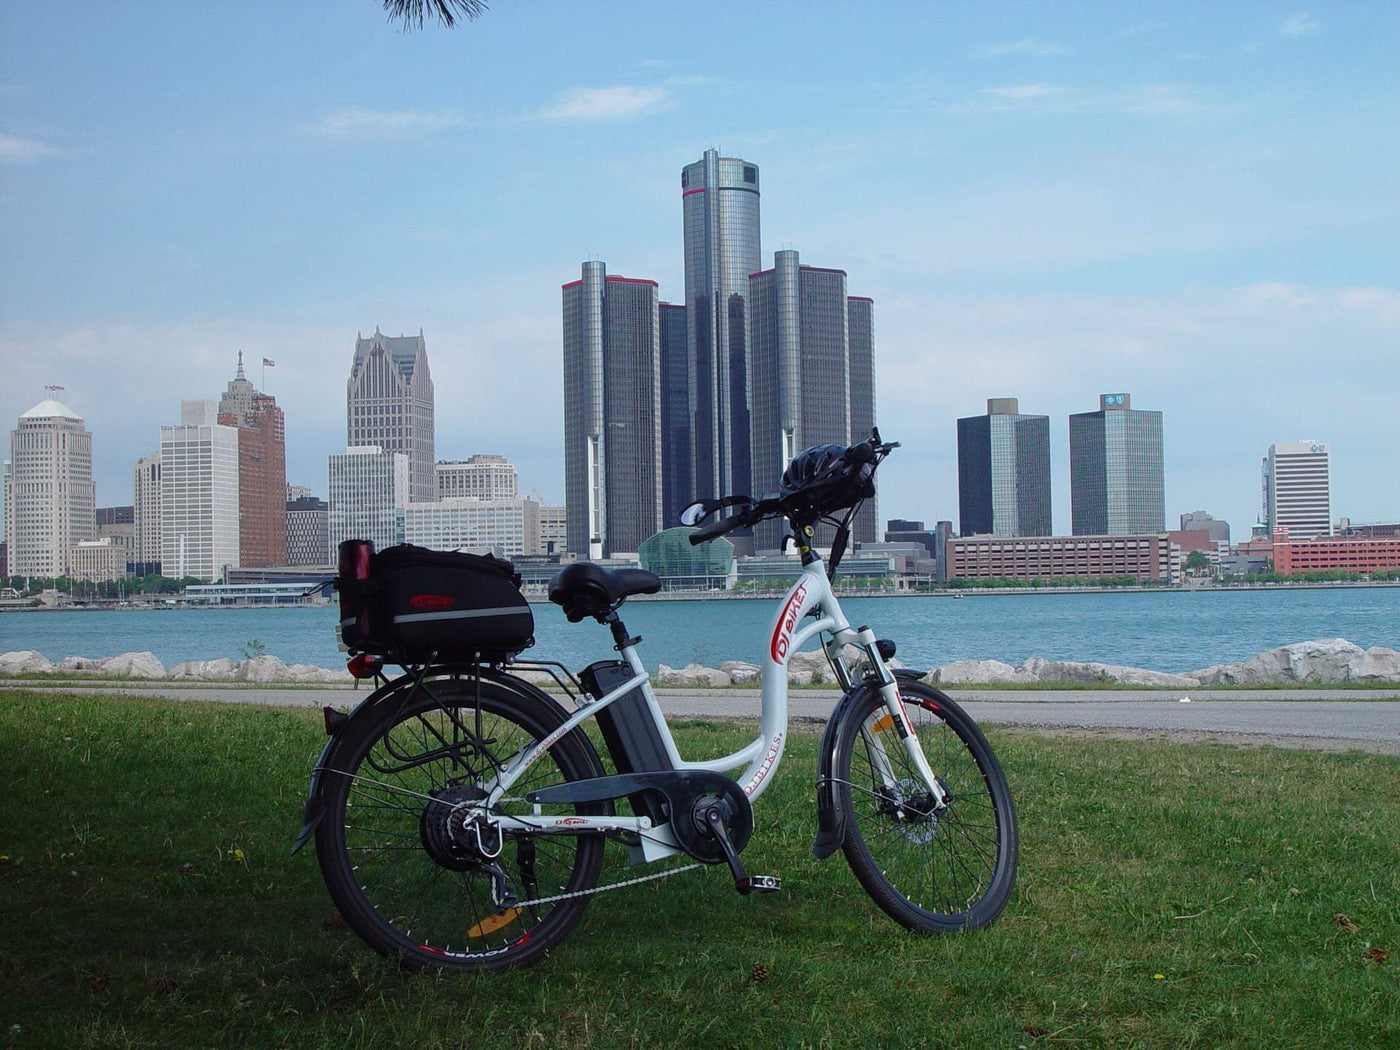 A DJ City Bike e-bike in front of a Detroit skyline and the Detroit River